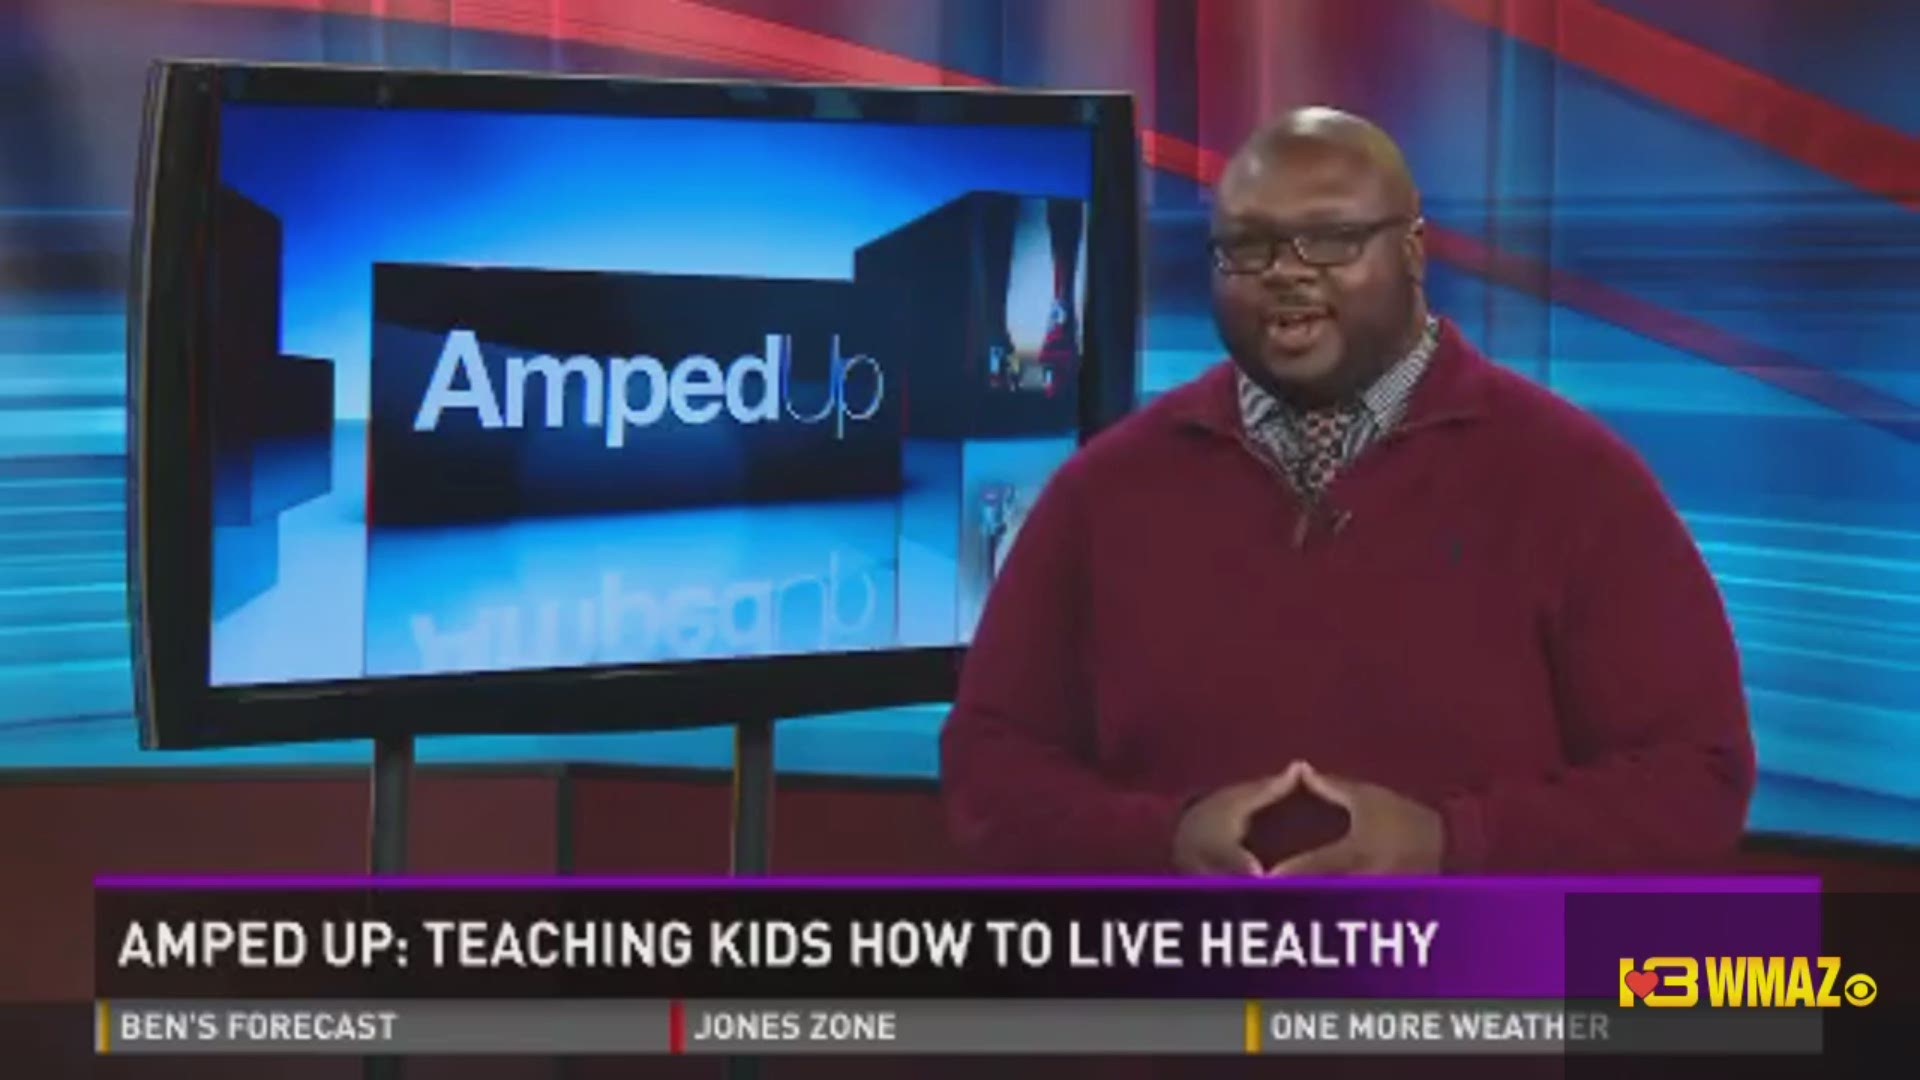 Our Marvin James explains how parents and kids can fight childhood obesity.